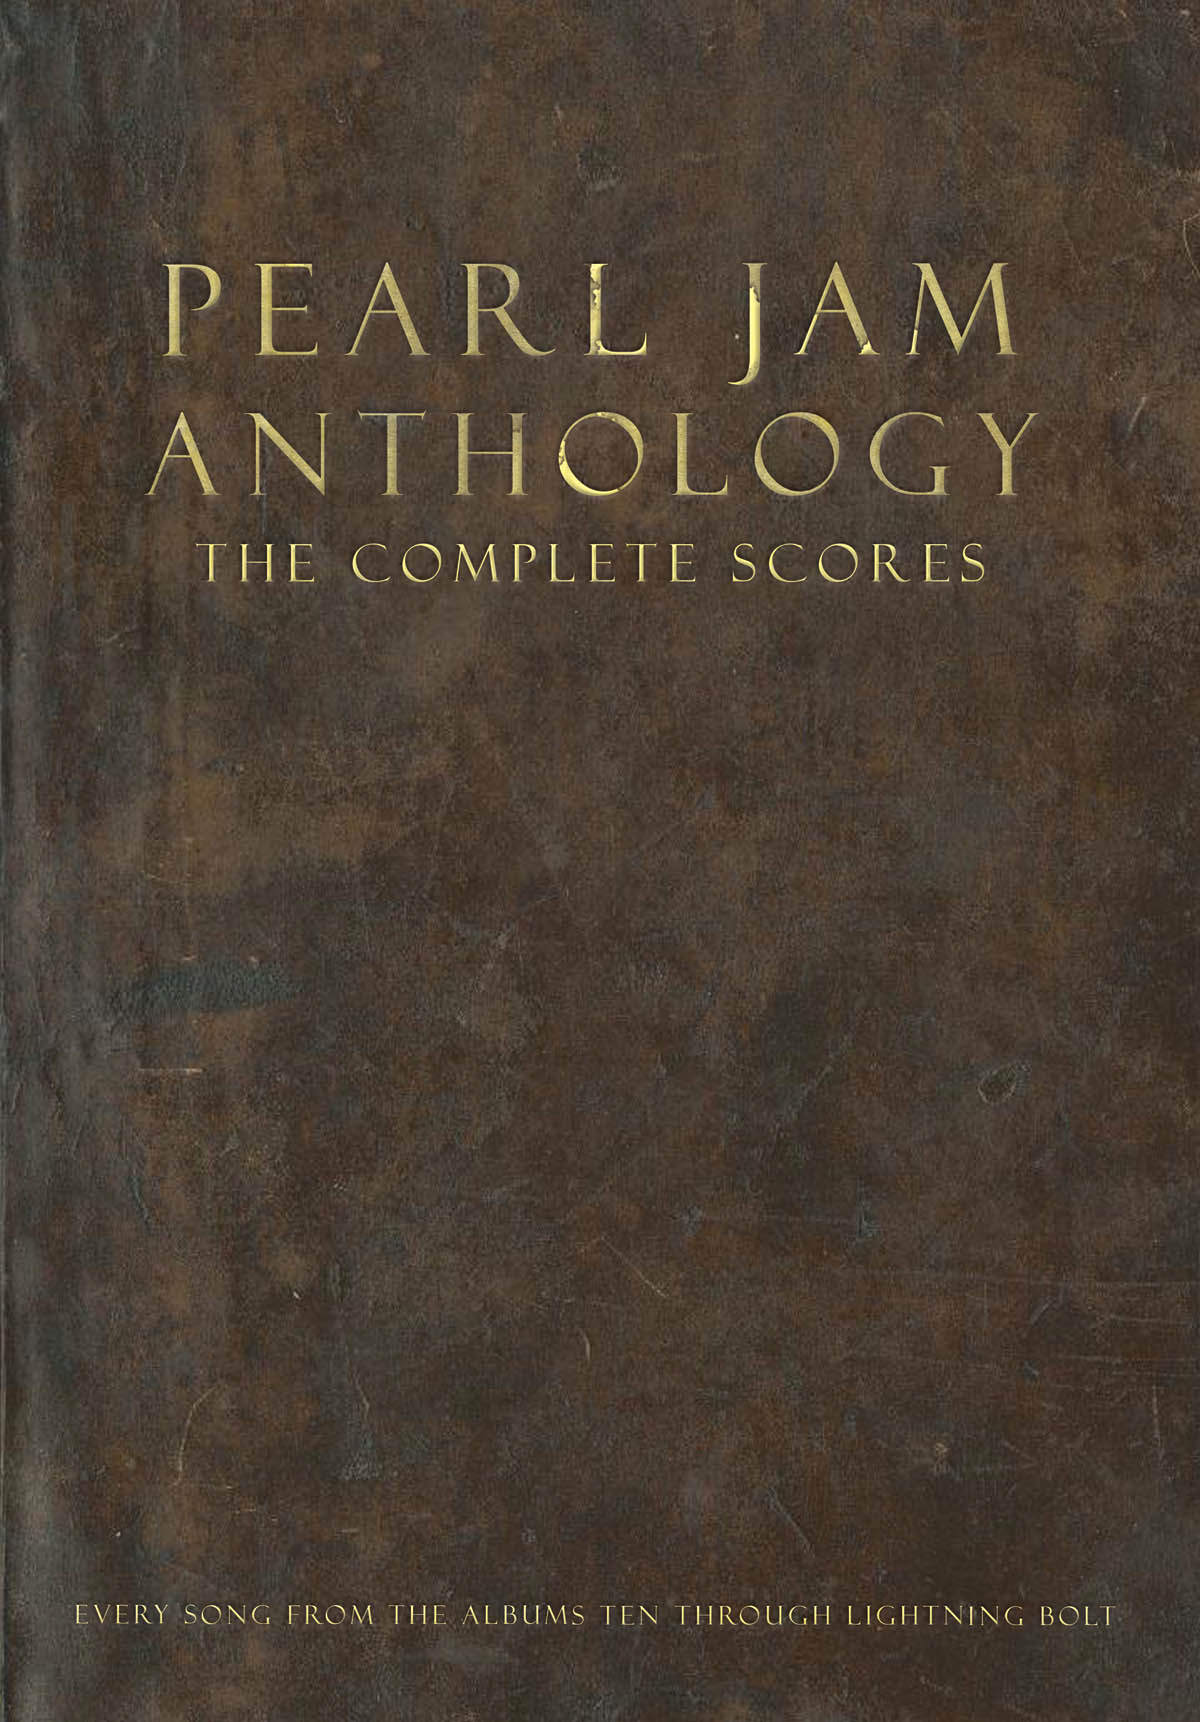 Pearl Jam Anthology – The Complete Scores